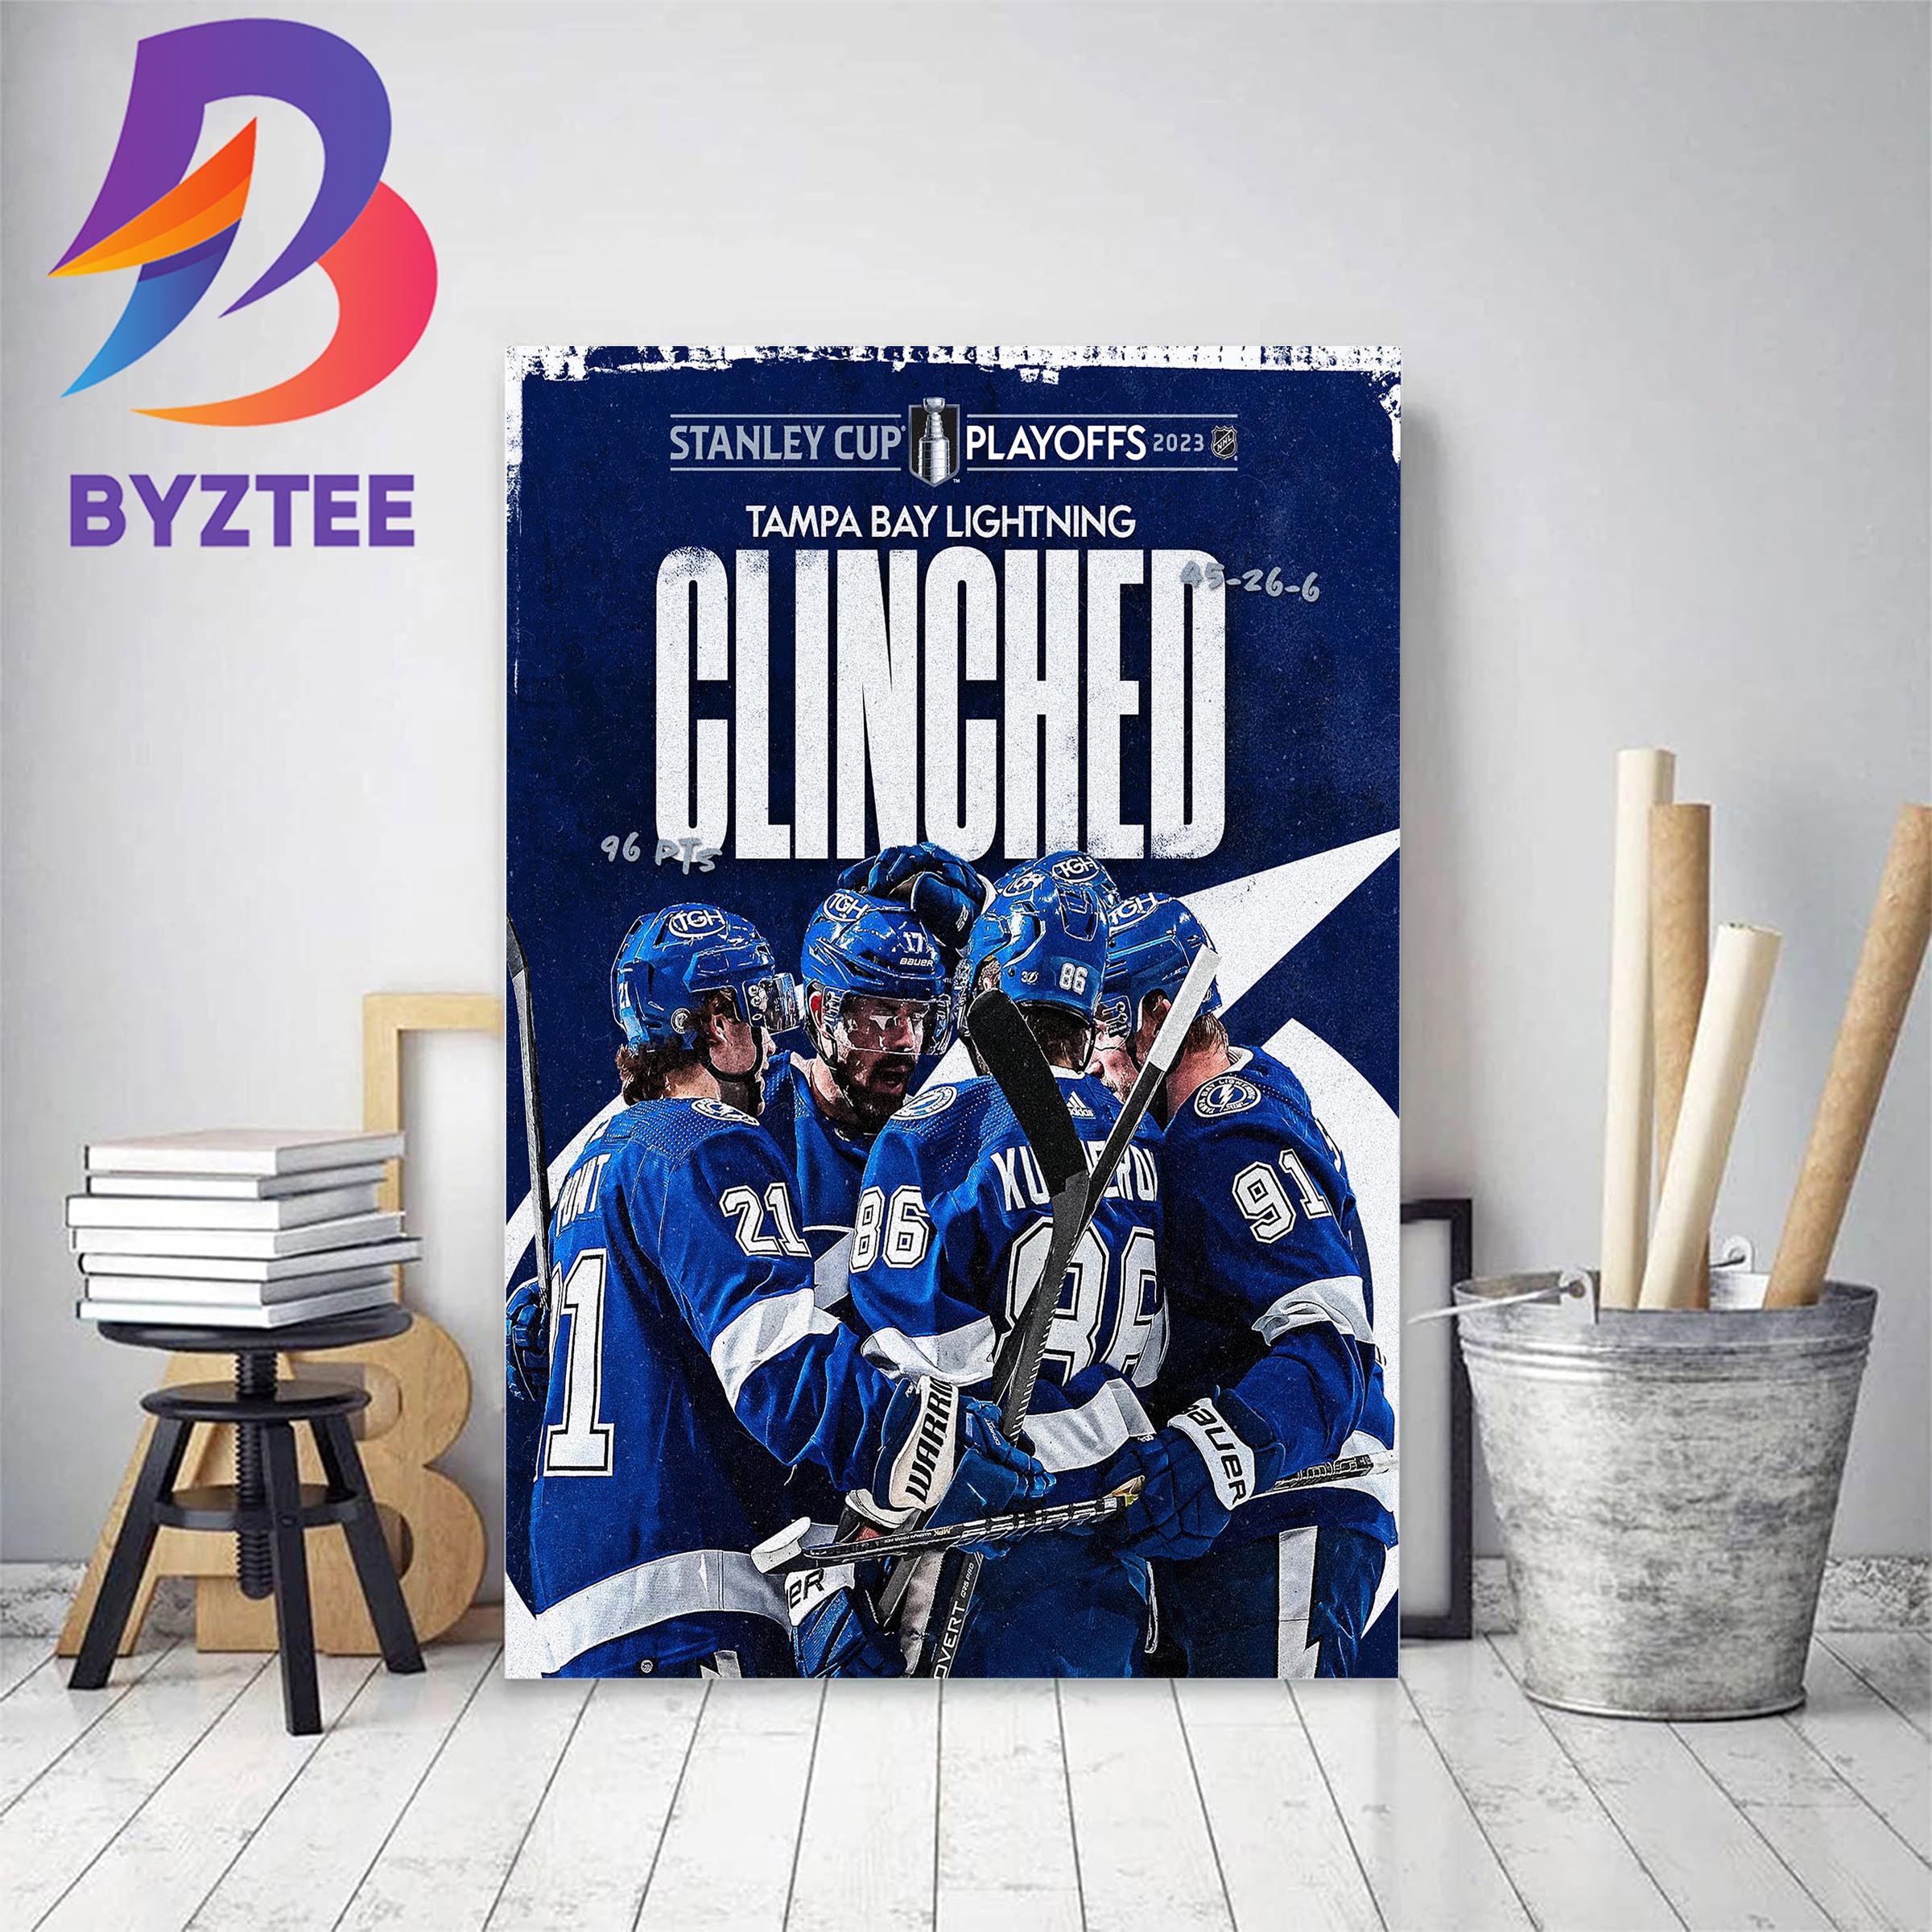 https://byztee.com/wp-content/uploads/2023/04/Tampa-Bay-Lightning-Clinched-Stanley-Cup-Playoffs-2023-Decor-Poster-Canvas_59603168-1.jpg